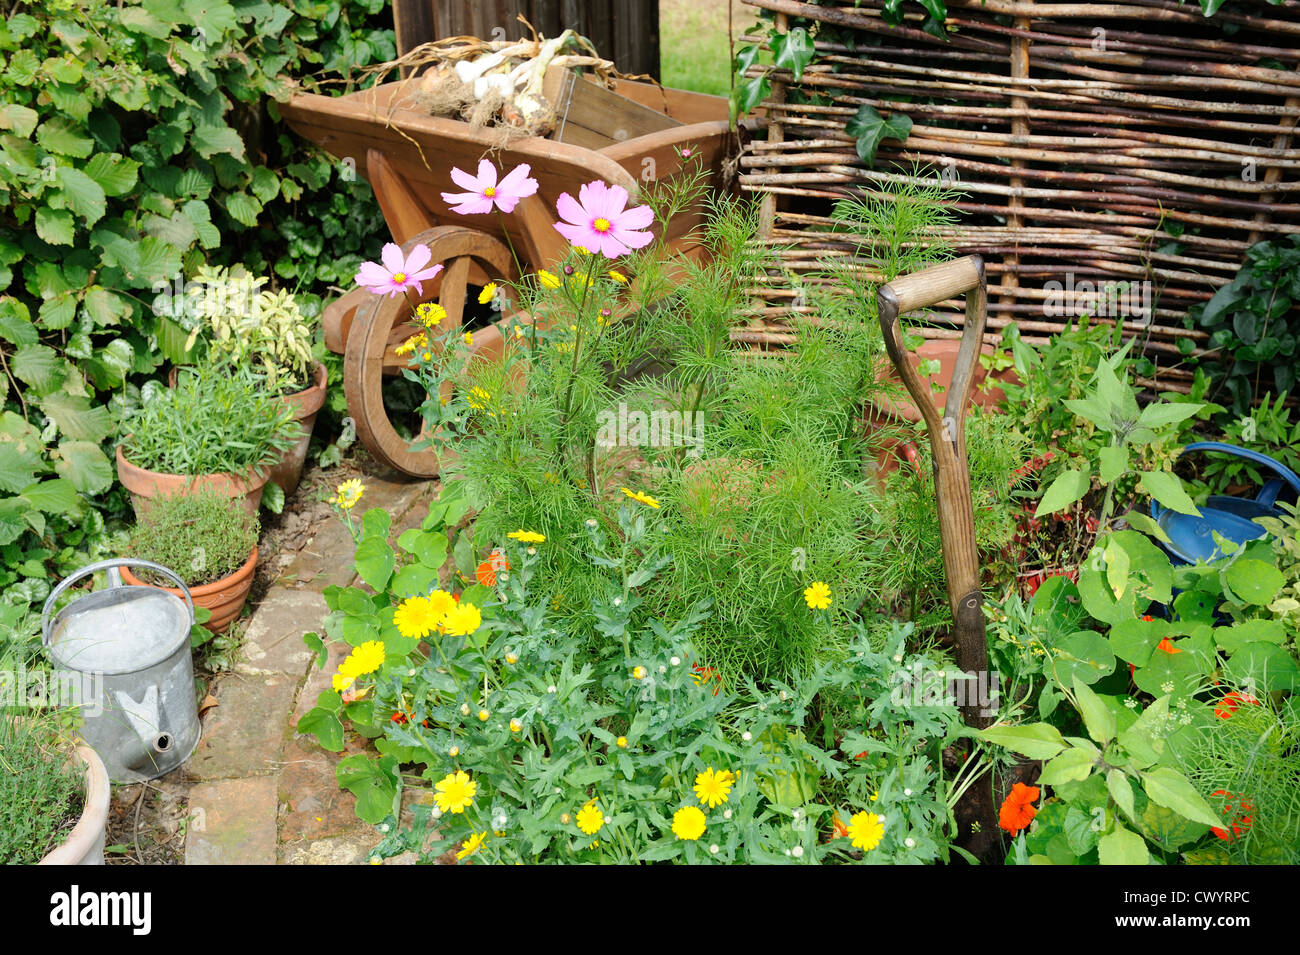 Summer border of cosmos and corn marigold with wooden wheelbarrow and path leading to garden gate Stock Photo